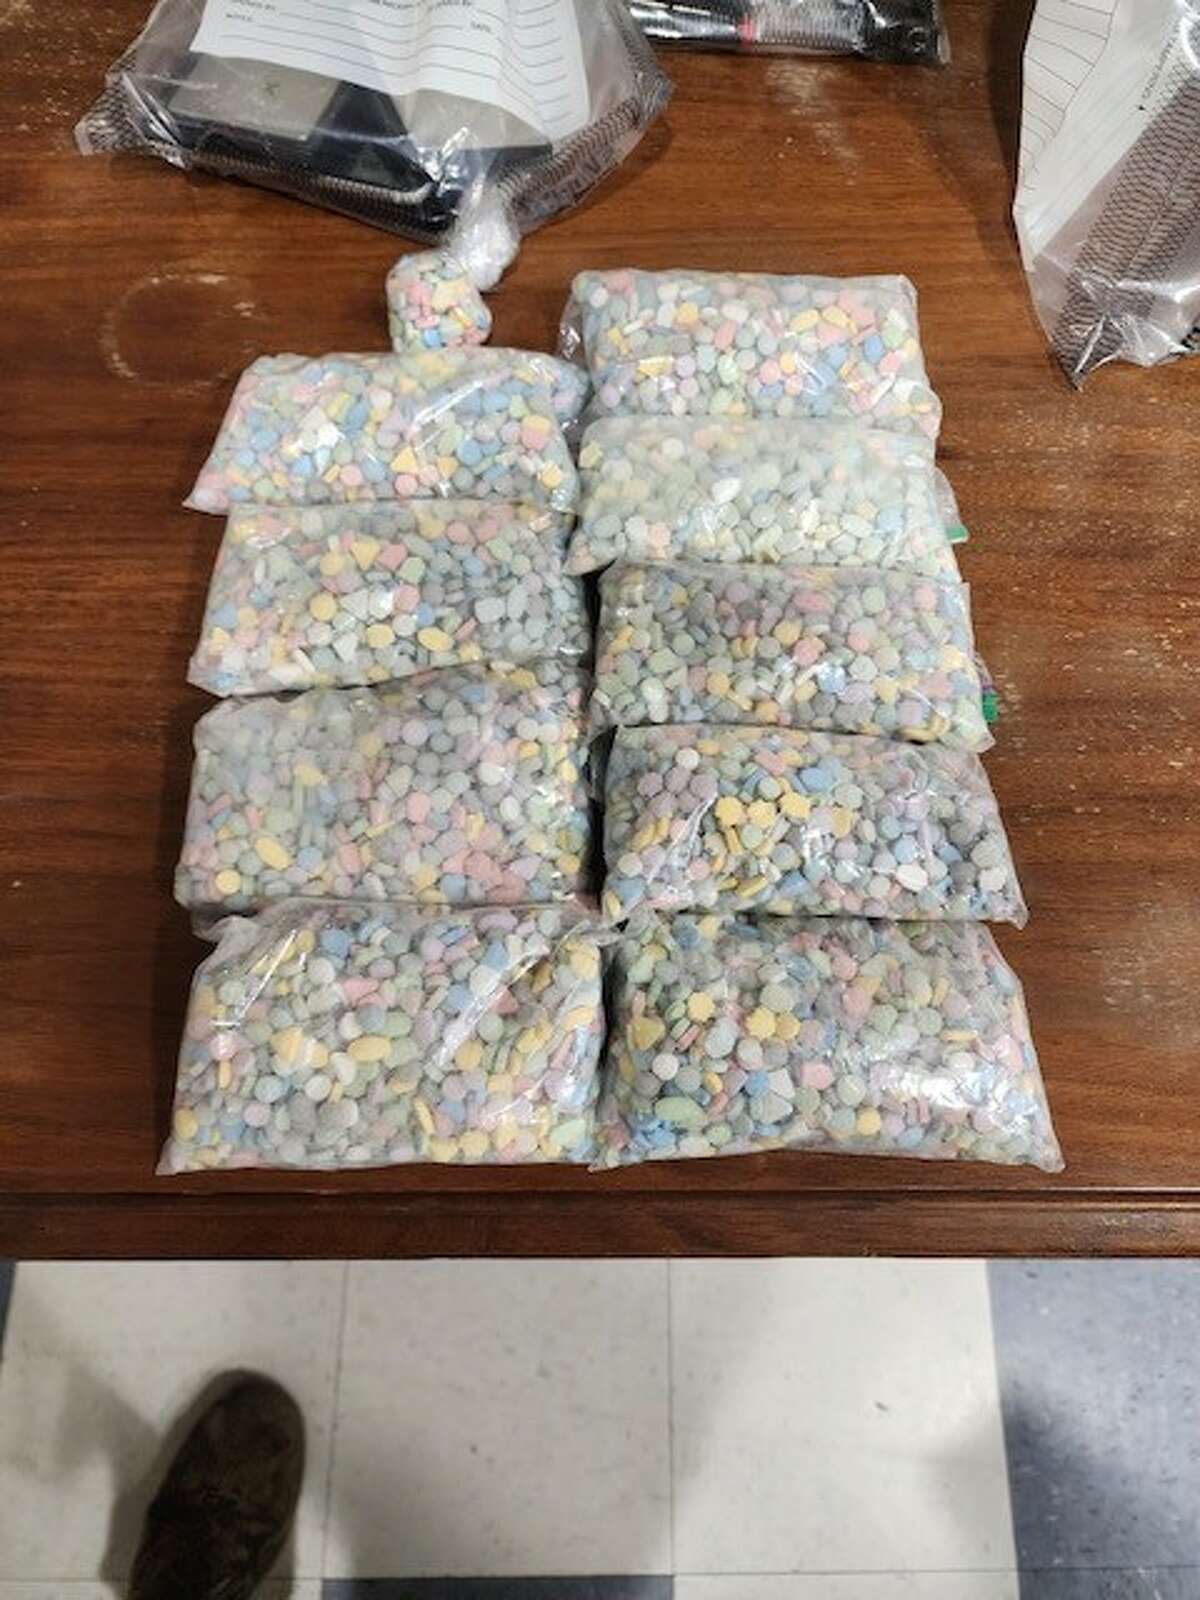 Silsbee just had the largest fentanyl bust in Hardin County history